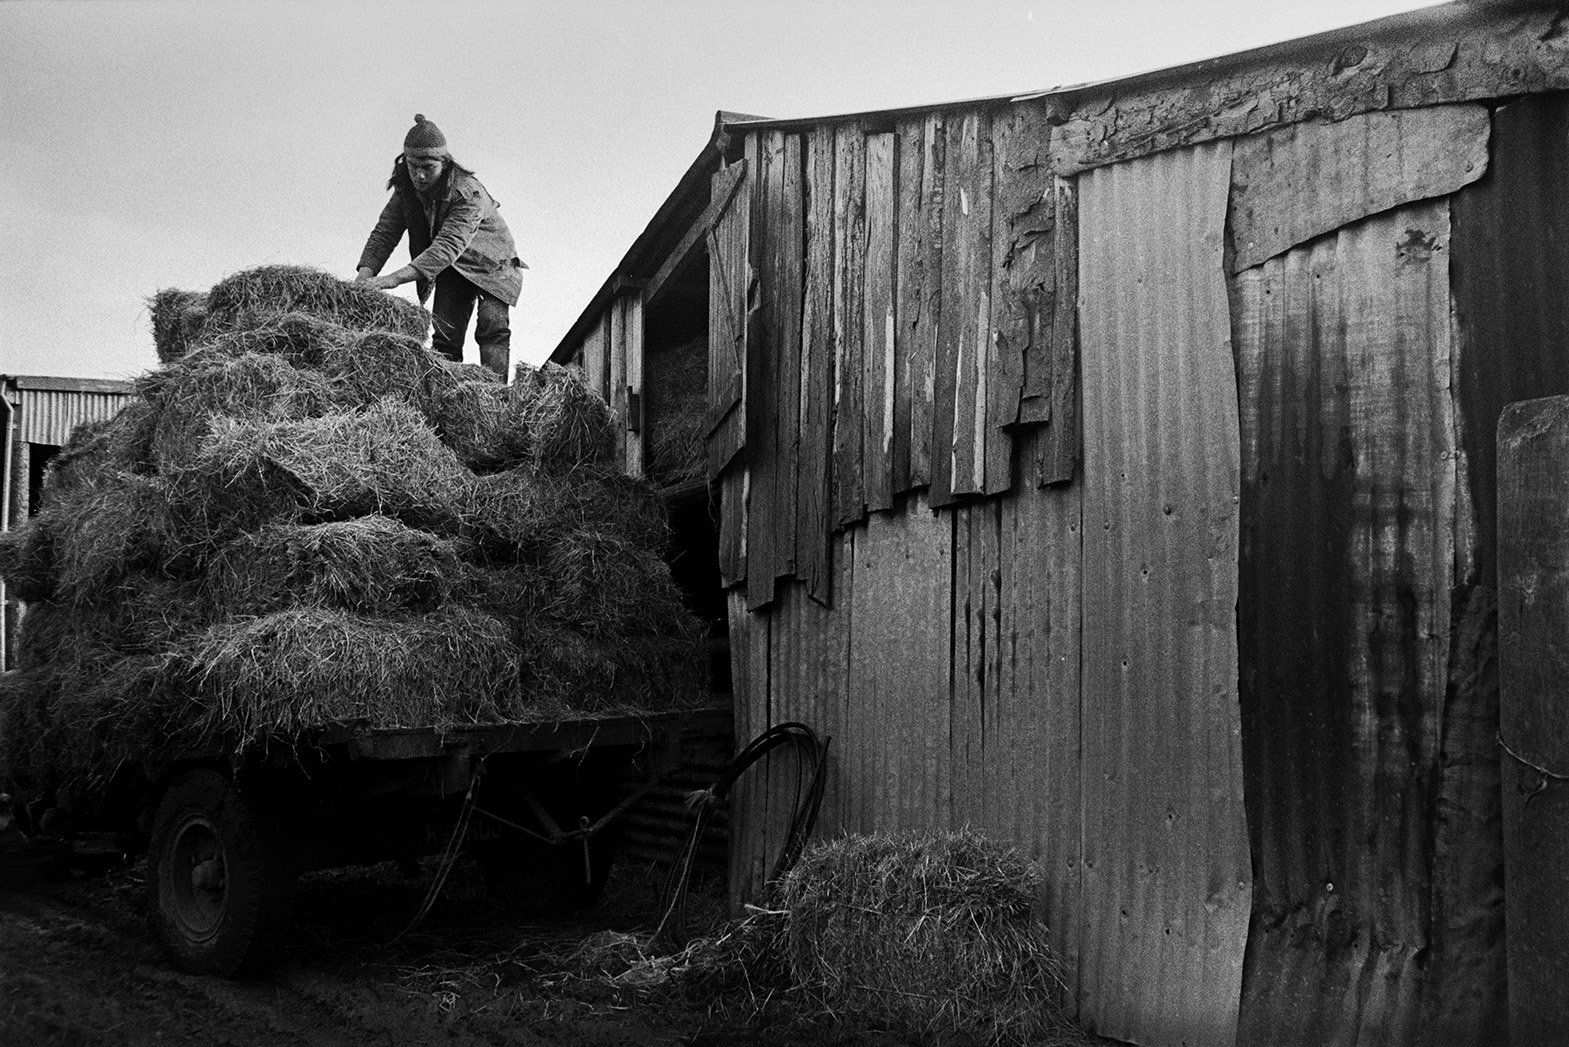 Derek Bright unloading hay bales from a trailer and putting them into a corrugated iron barn at Mill Road Farm, Beaford. The farm was also known as Jeffrys.